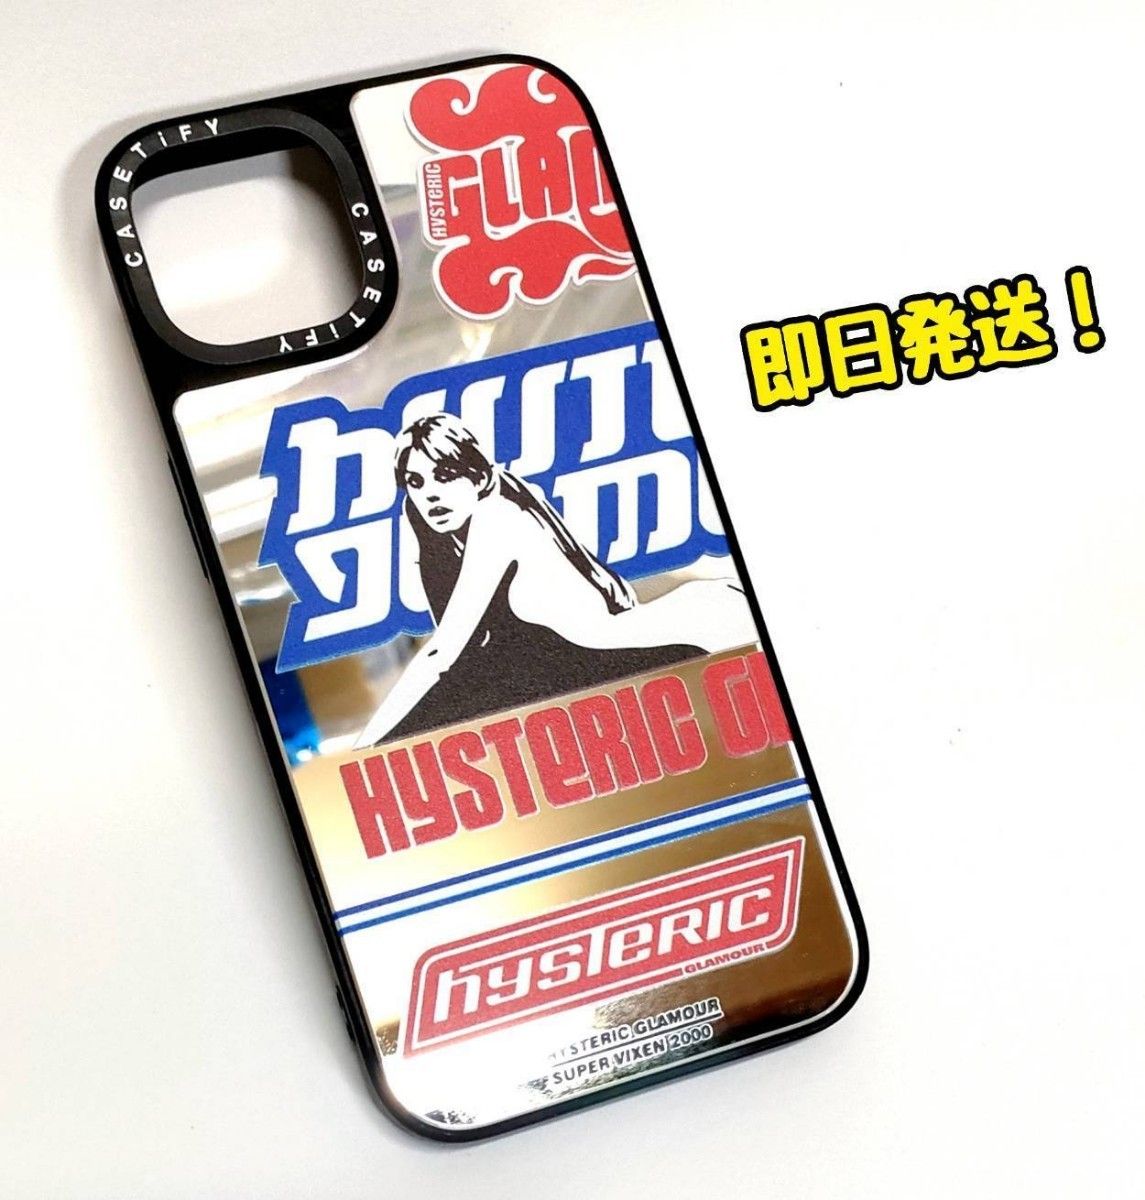 HYSTERIC GLAMOUR ケースの新品・未使用品・中古品｜PayPayフリマ